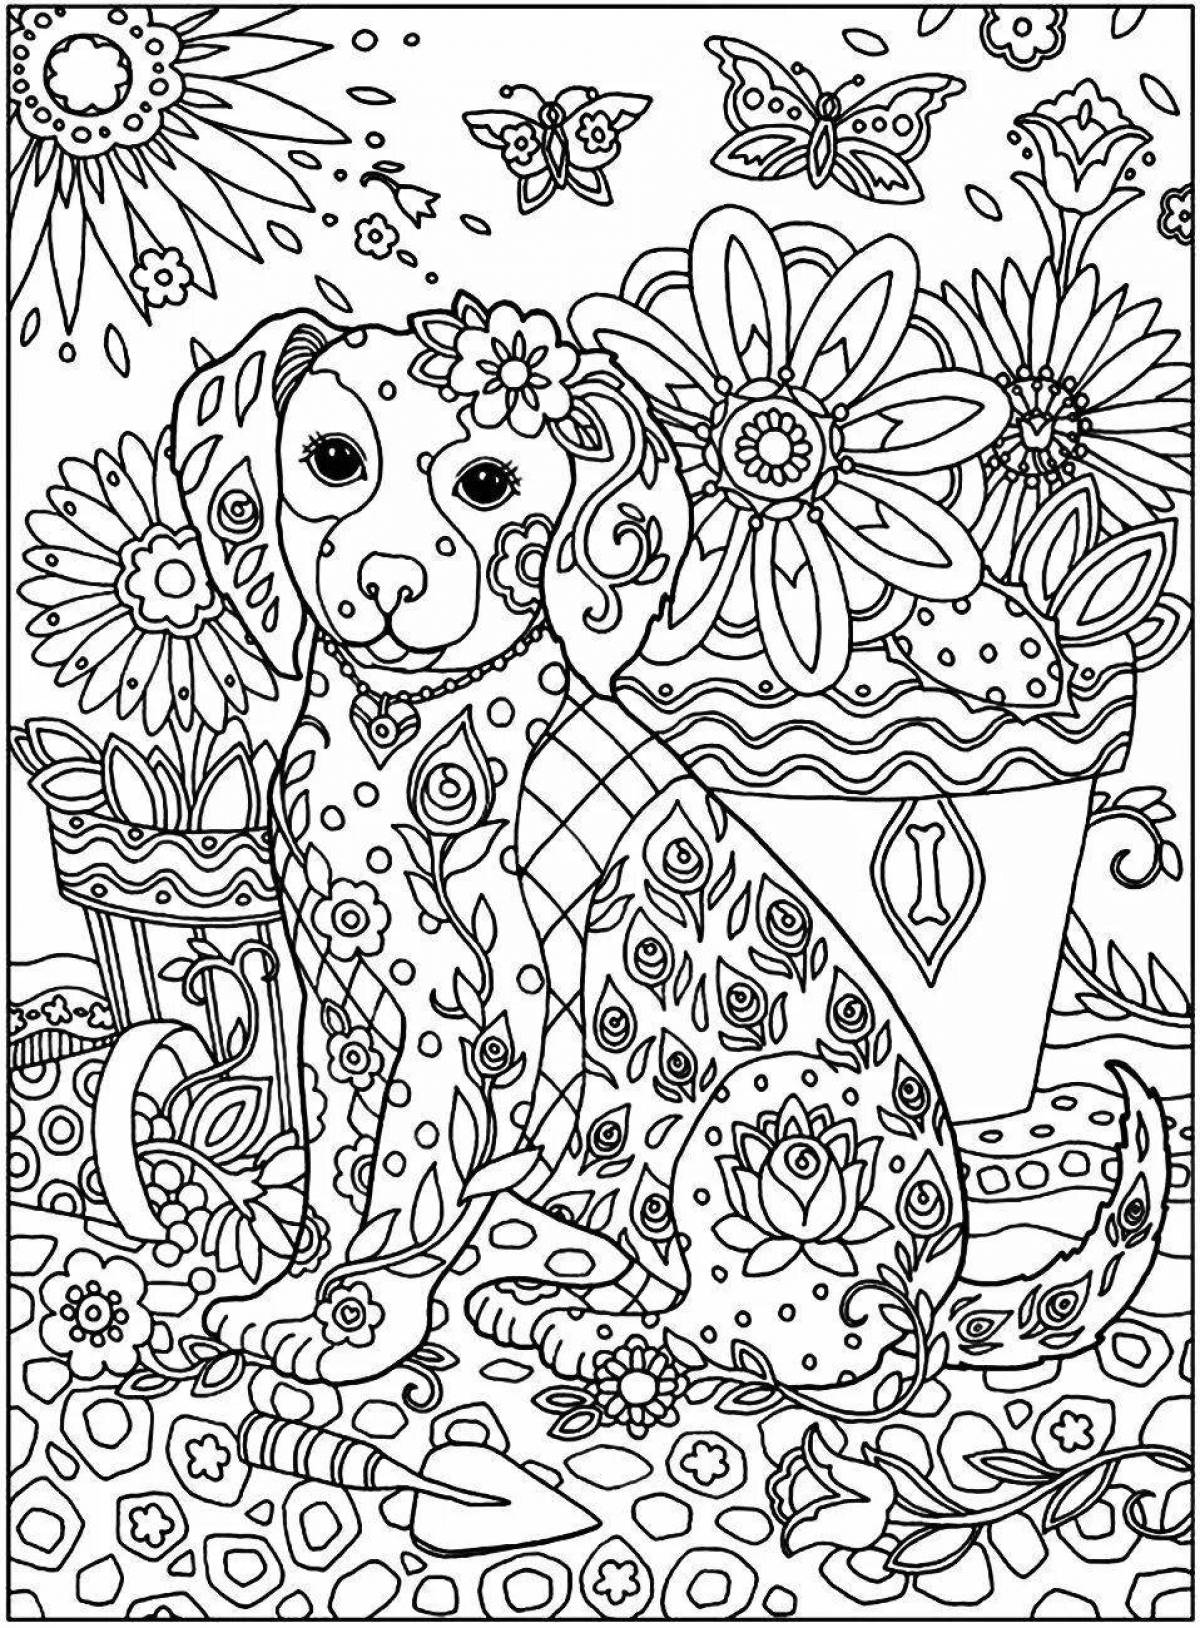 Amazing color anti-stress coloring book for children 10 years old